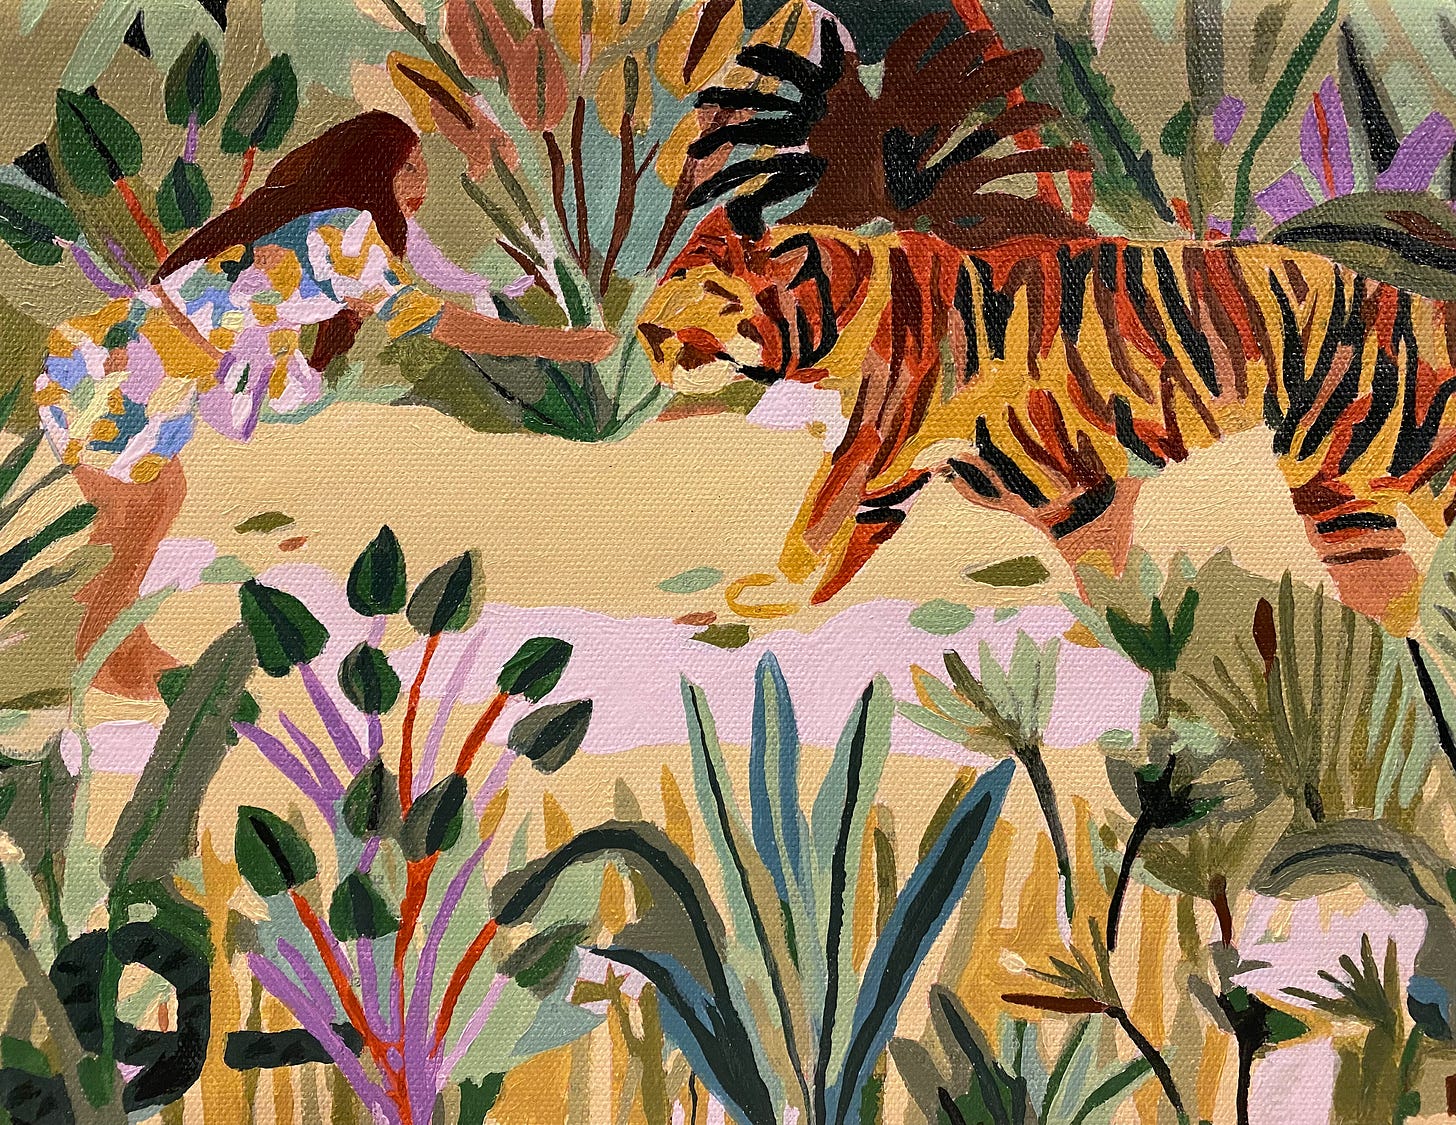 Progress photo of a paint-by-numbers kit from Australia-based UK artist Hebe Studio featuring a jungle scene with colorful plants and a brunette petting a tiger.